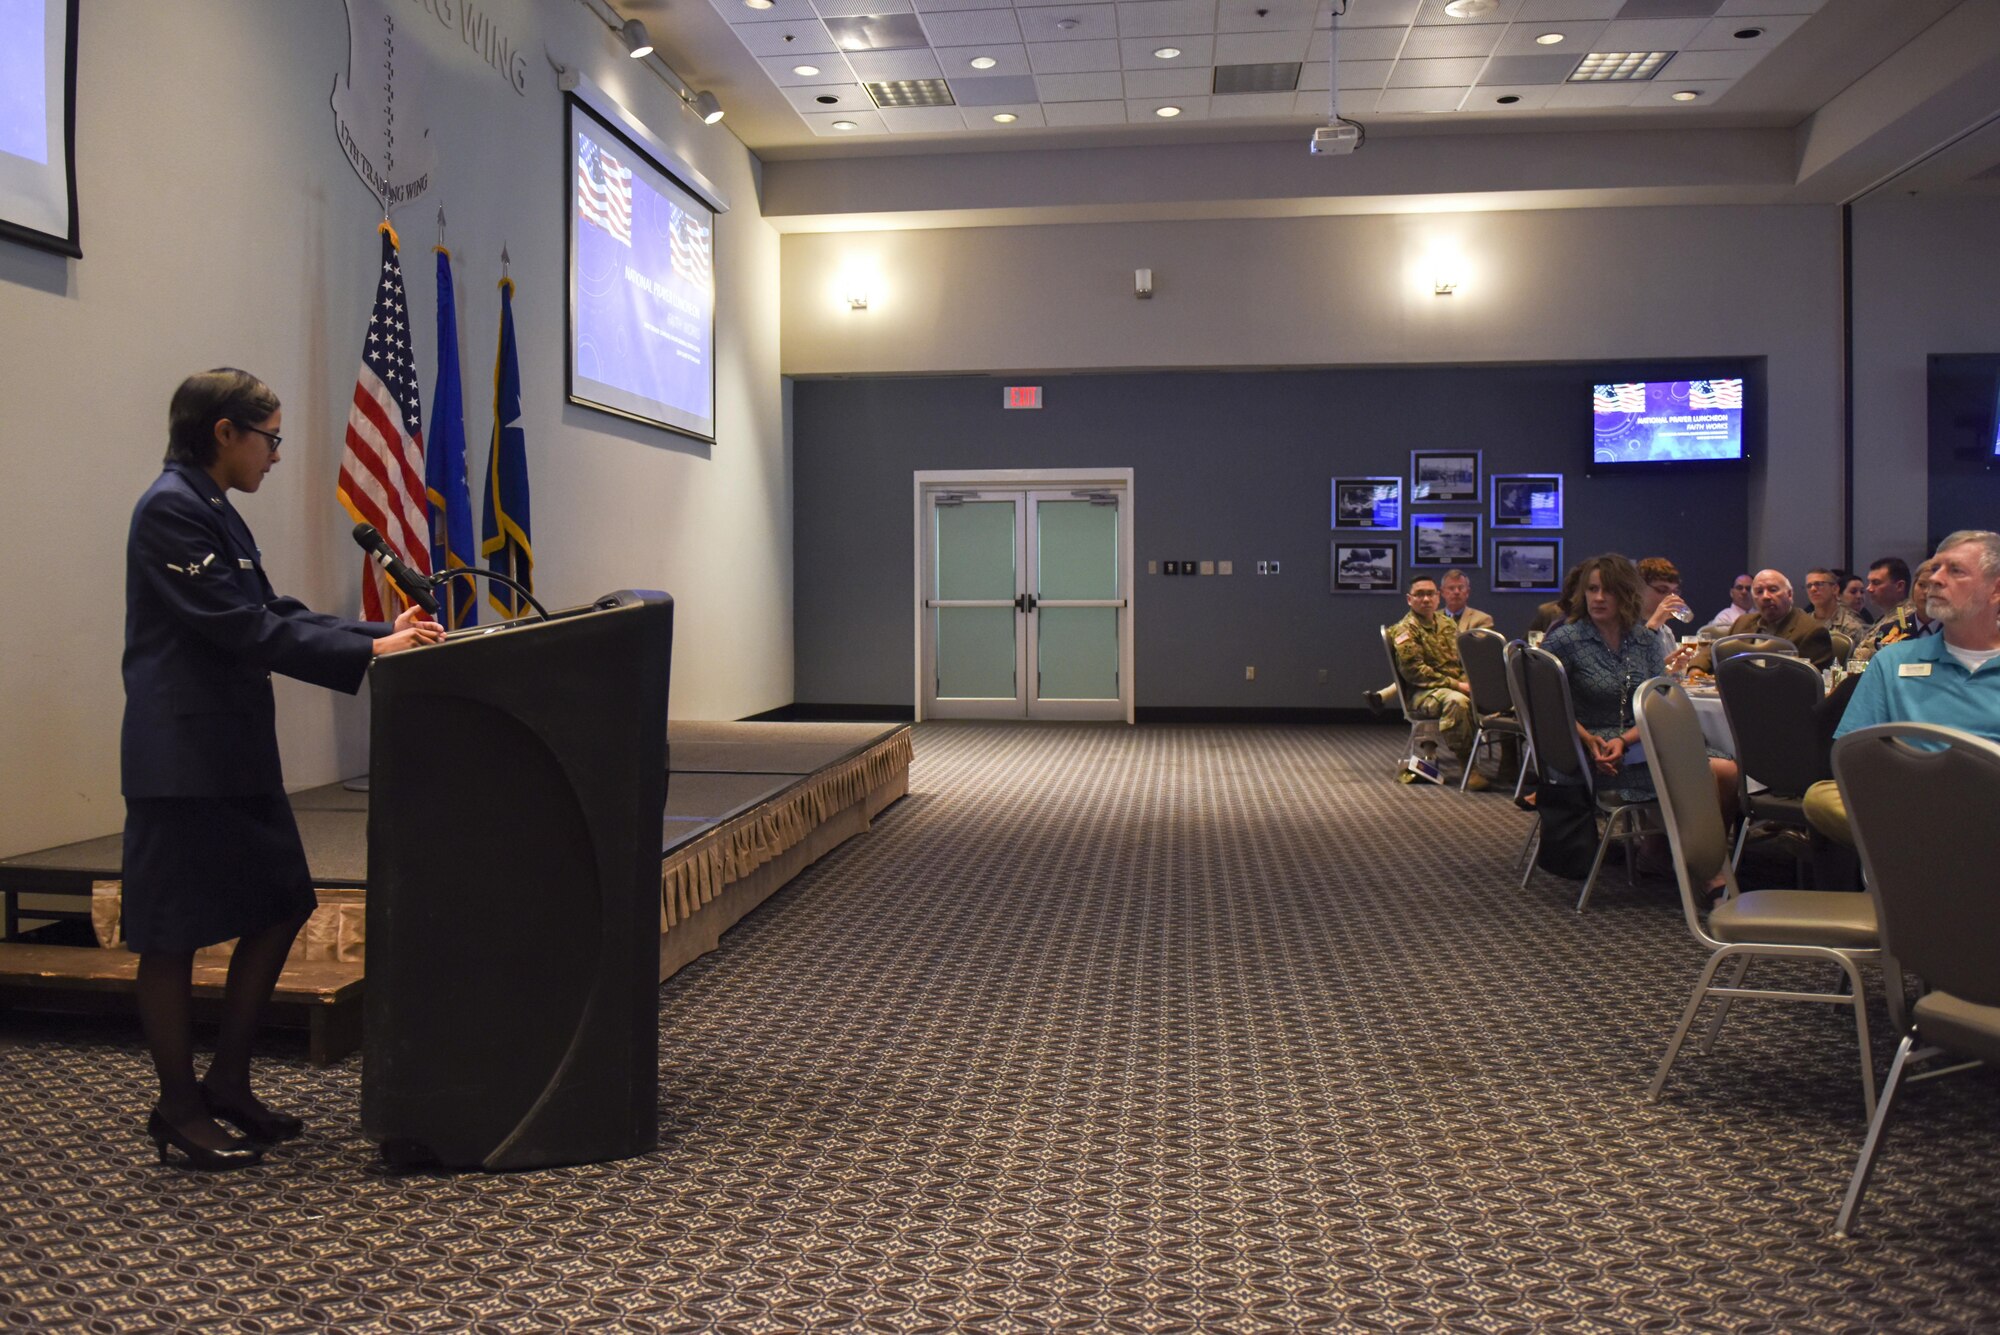 U.S. Air Force Airman Victoria Ramirez, 315th Training Squadron student, speaks at the Event Center on Goodfellow Air Force Base, Texas, March 15, 2017. Ramirez spoke about how her faith helped her through a challenging time. (U.S. Air Force photo by Airman 1st Class Chase Sousa/Released)